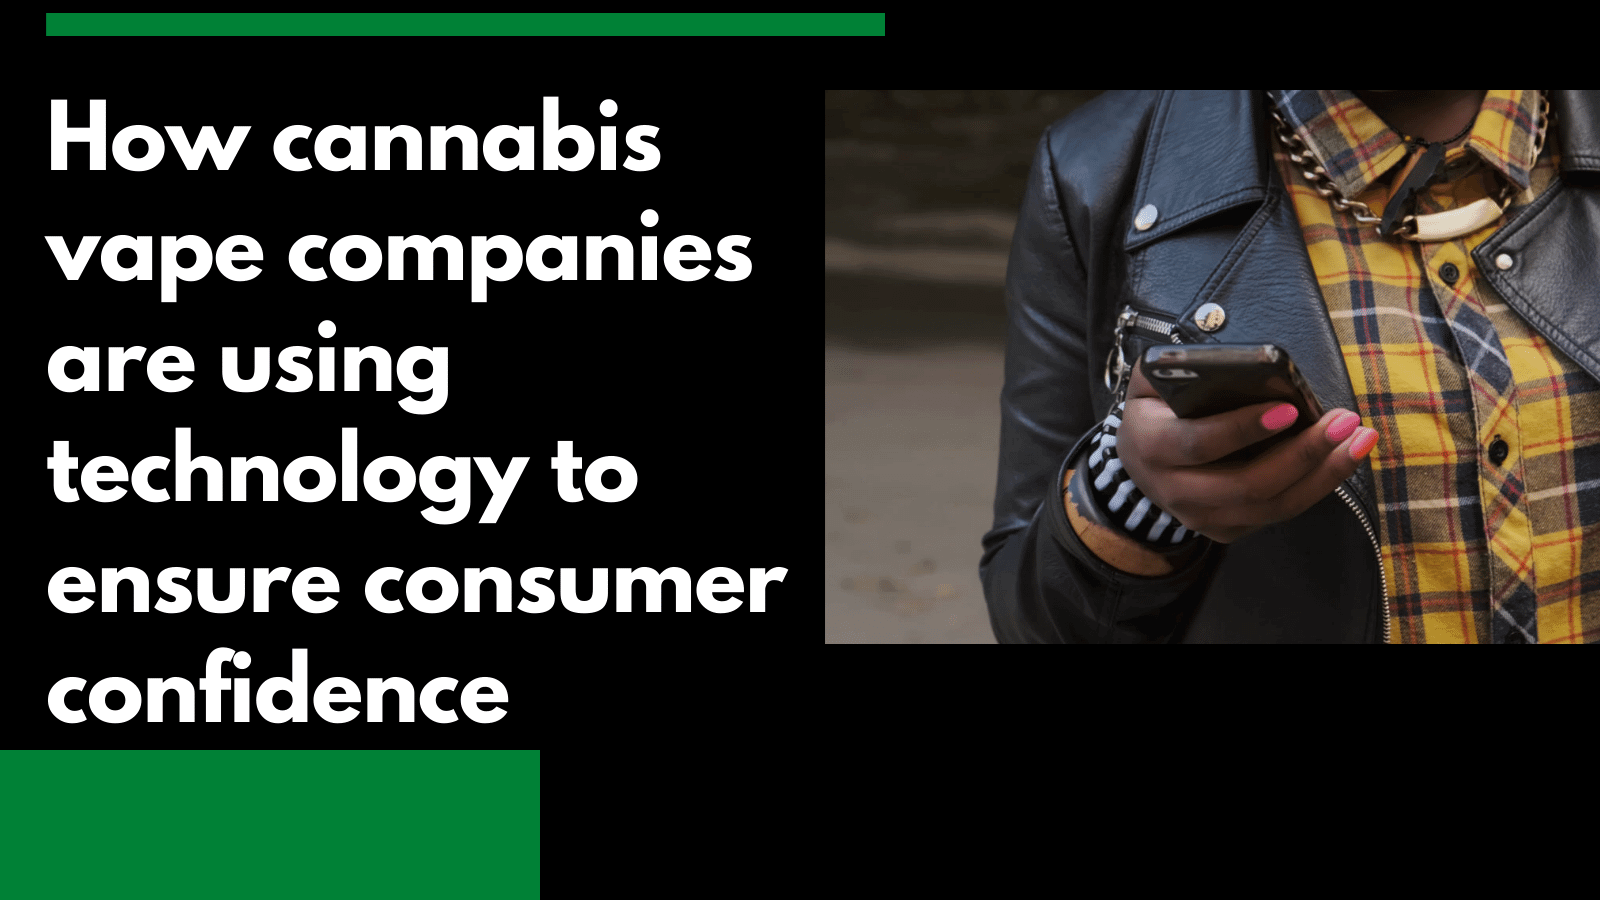 How Cannabis Companies use Tech to Ensure Consumer Confidence